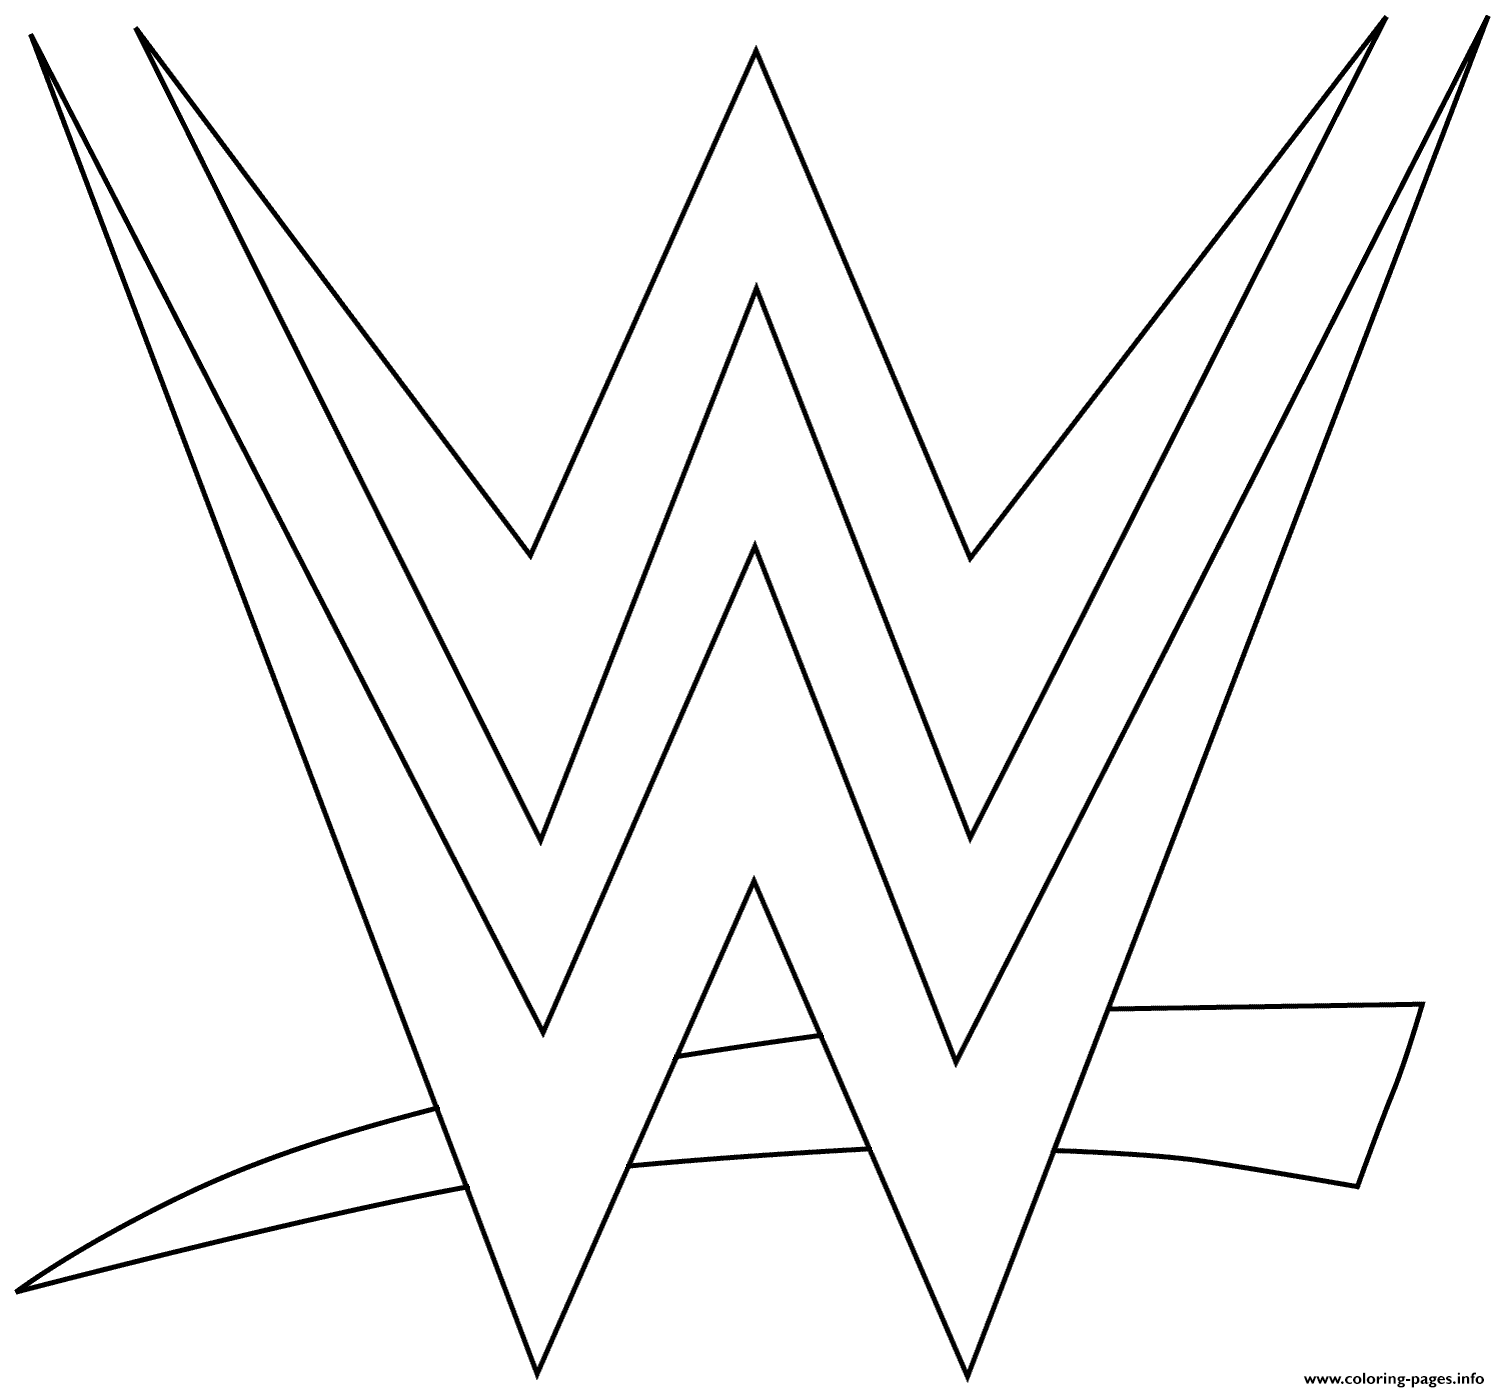 Wwe logo coloring page coloring page printable